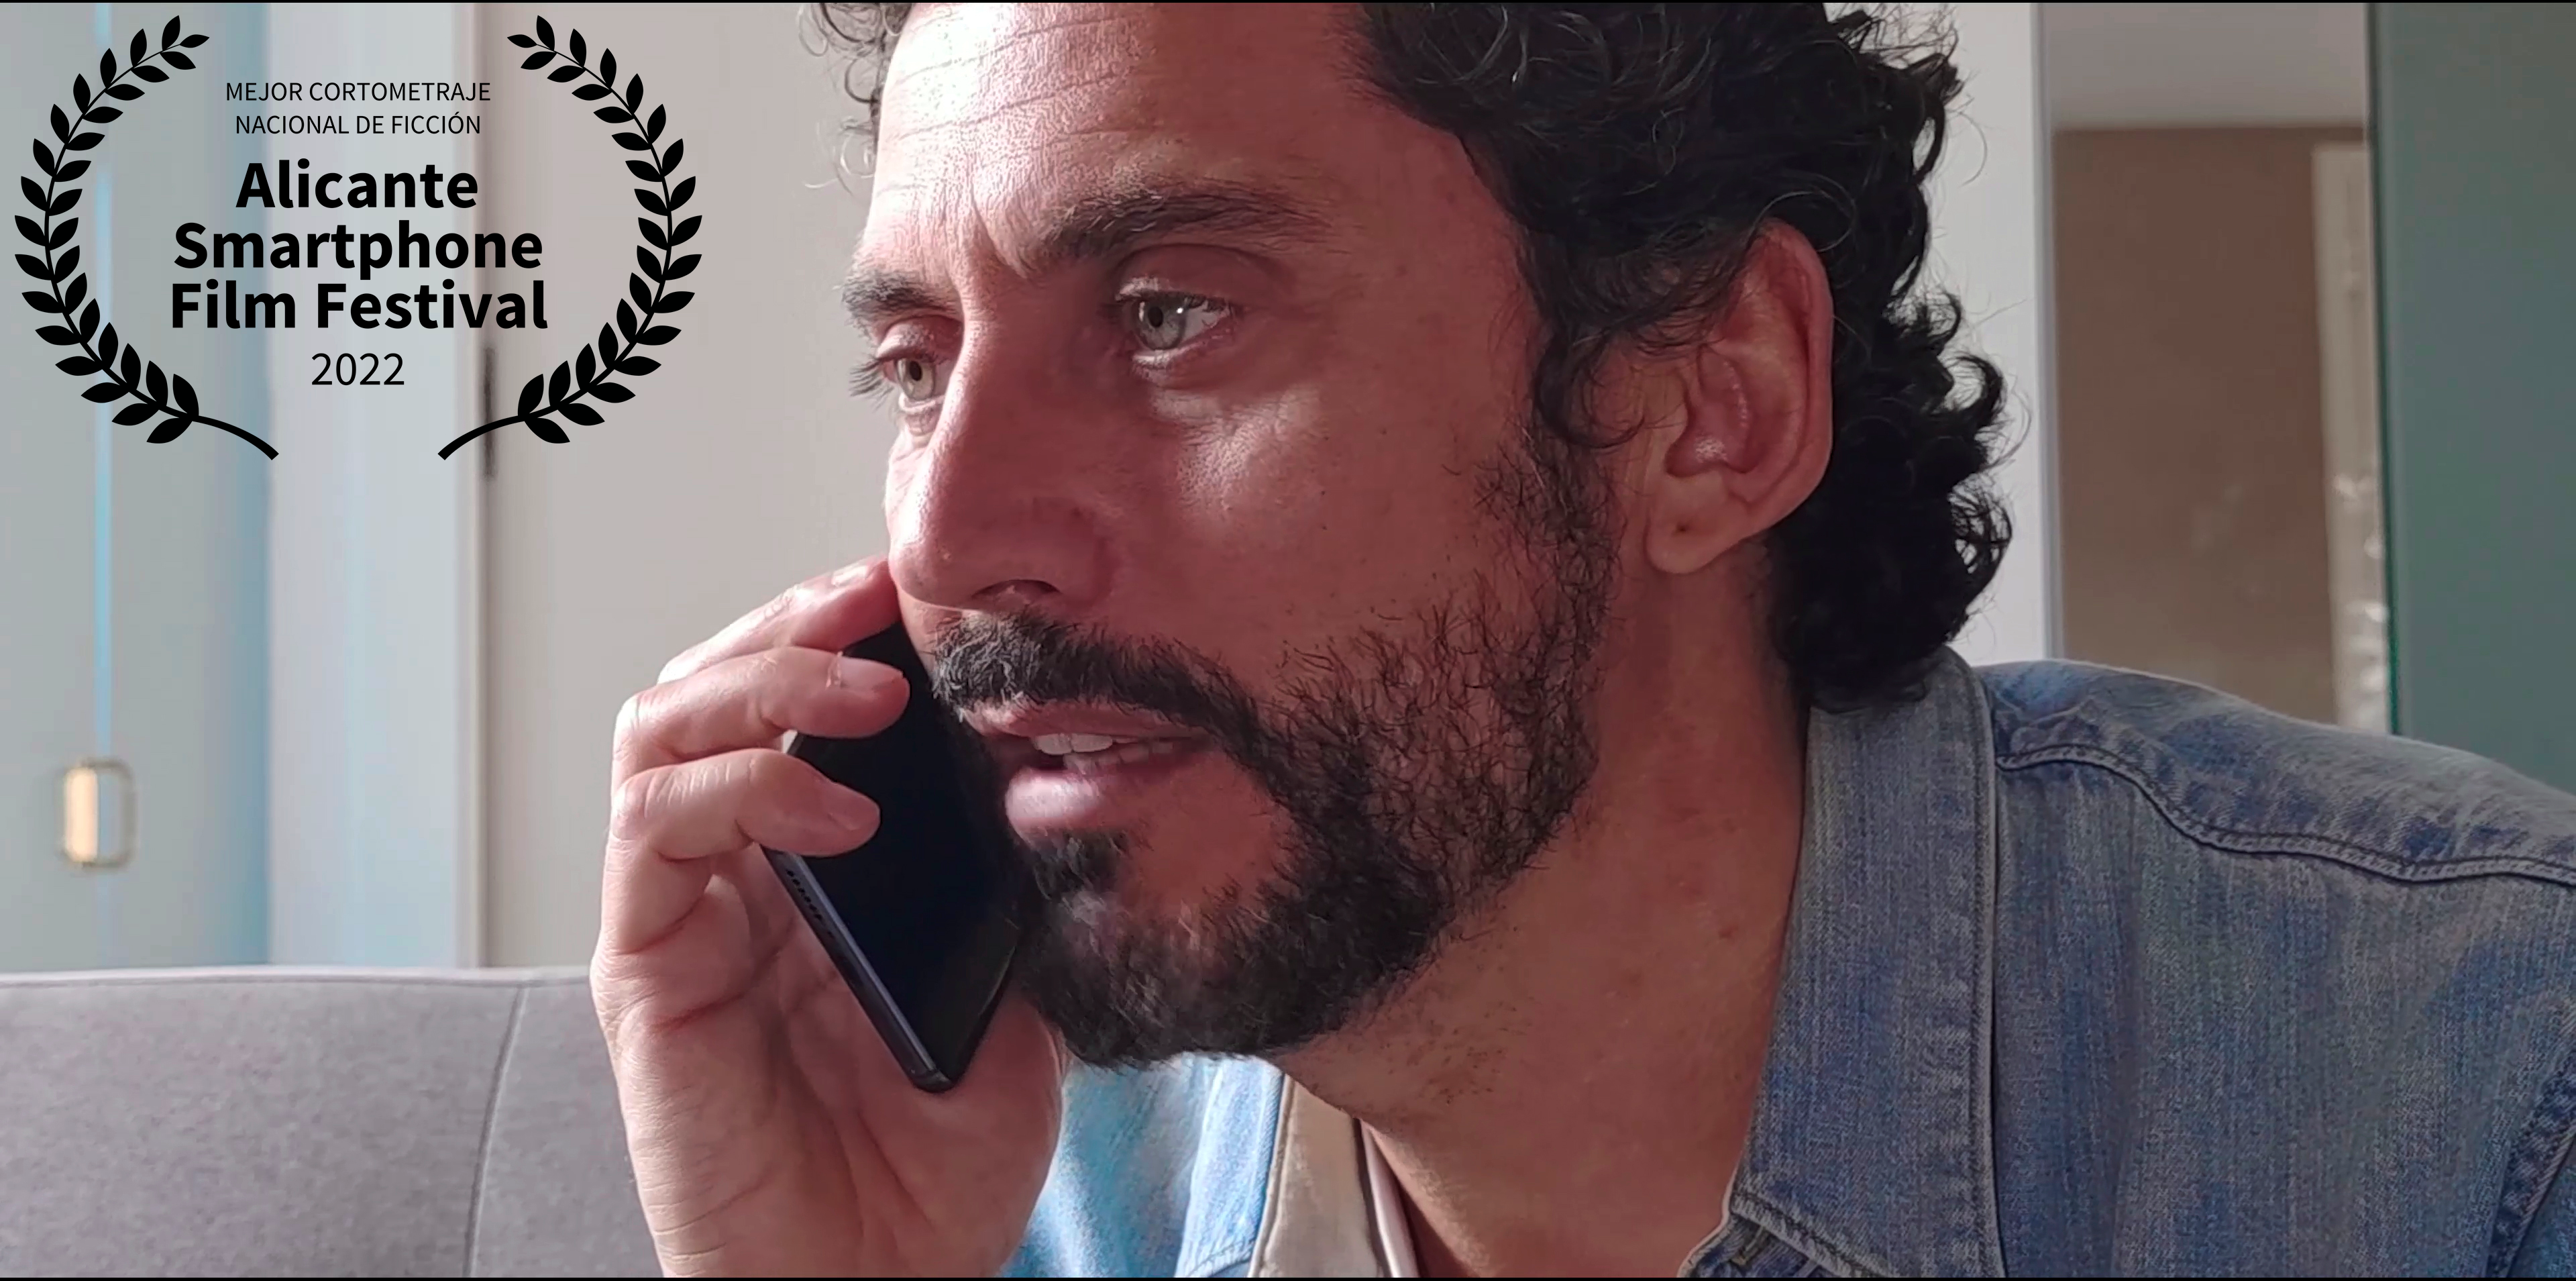 NEIGHBOOUR wins at the Alicante Smartphone Film Festival